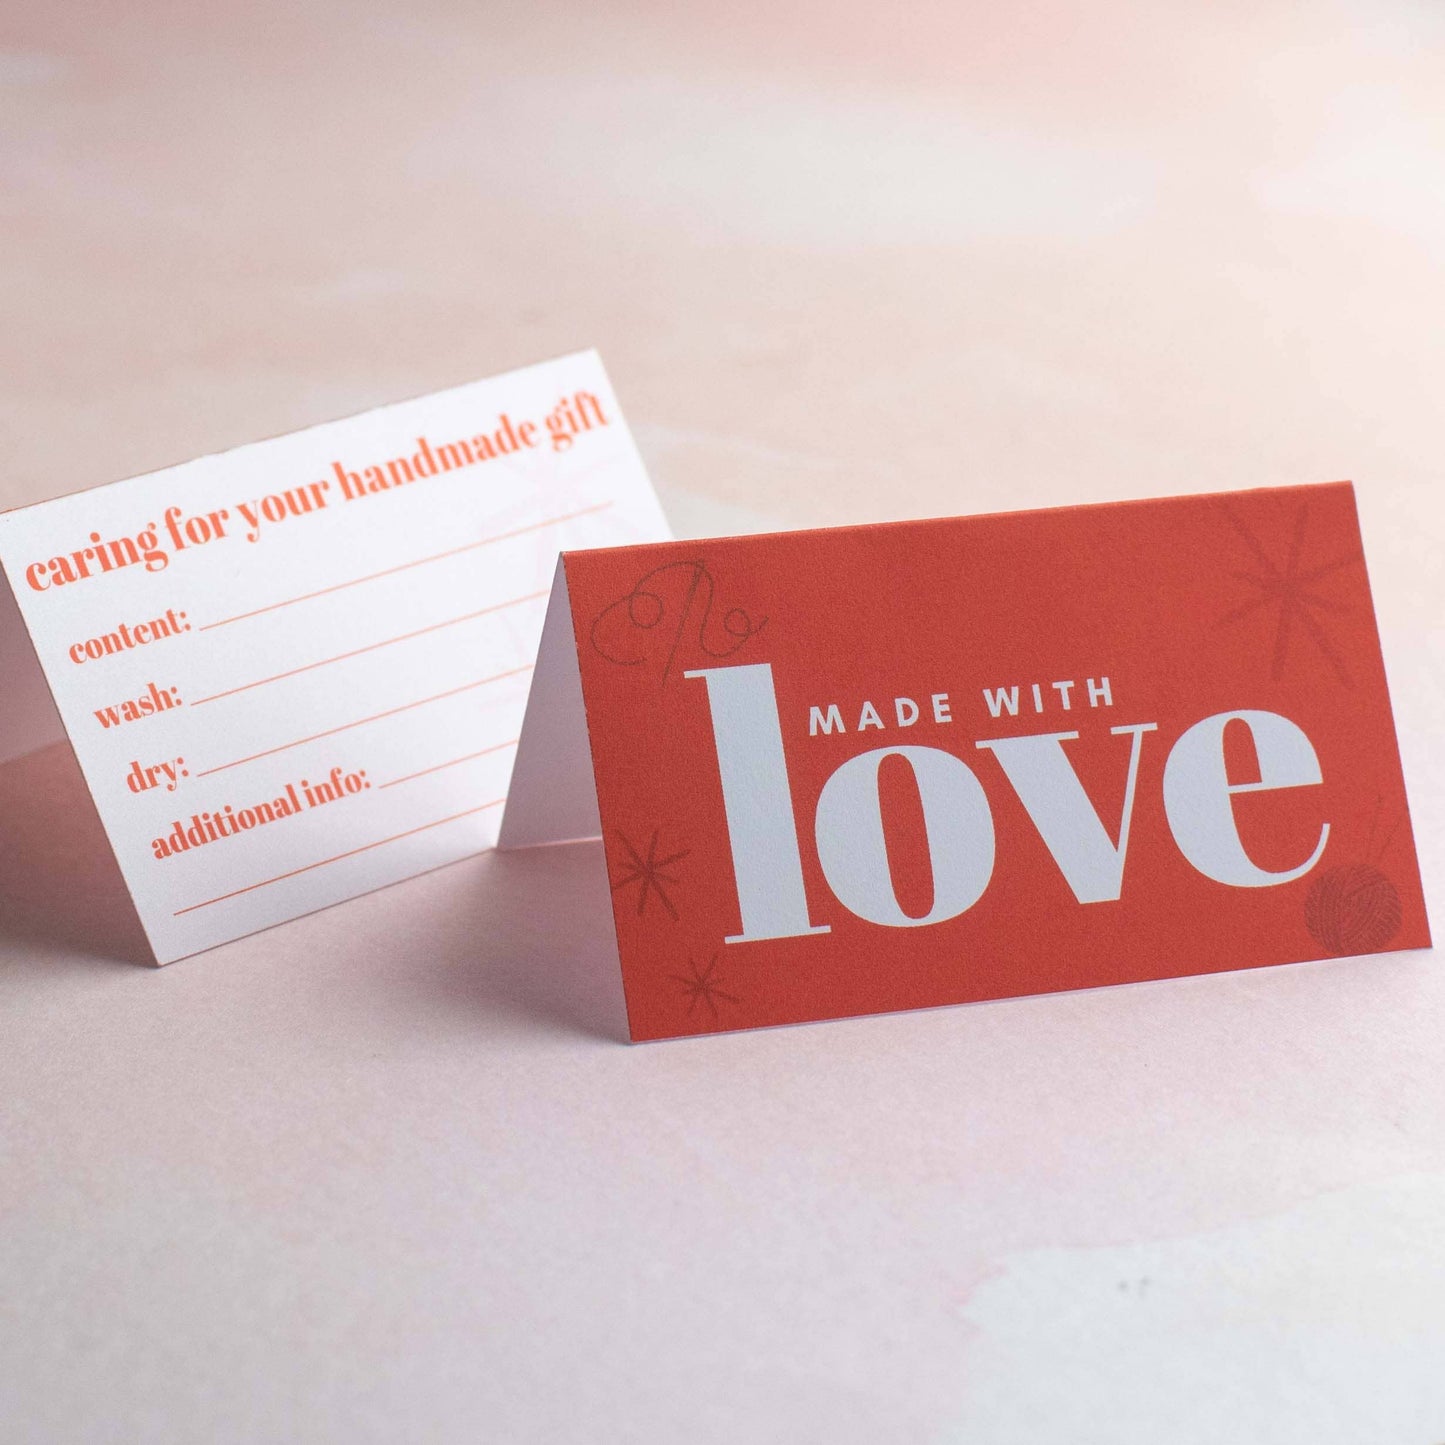 Mini "Care Instructions" Greeting Cards - "Made with Love"